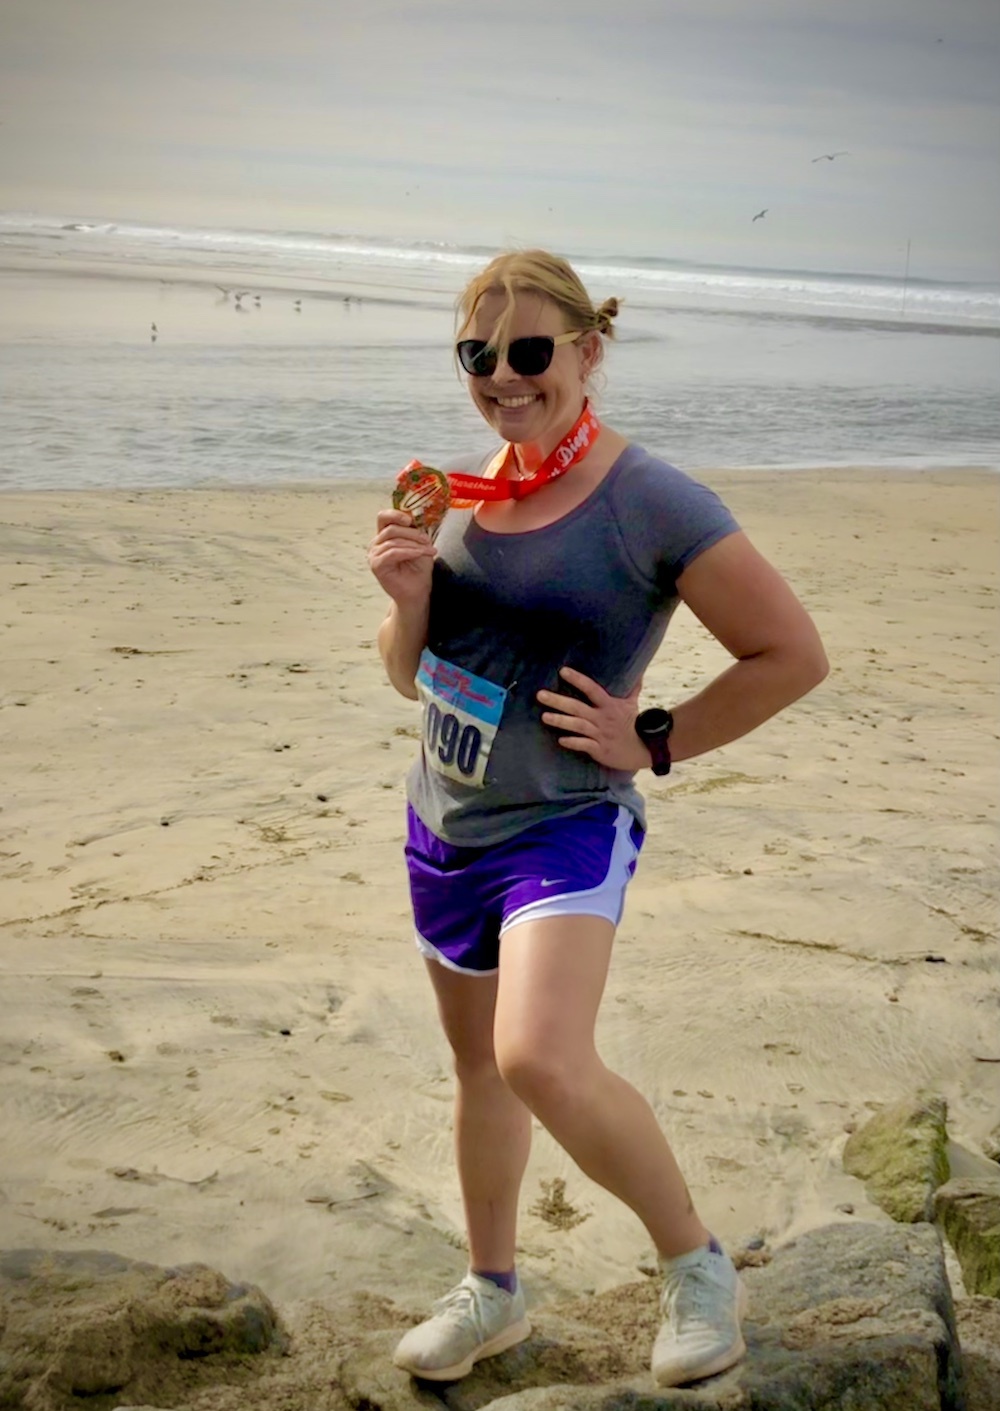 Person on beach after a running race with medal in hand and around neck. Ocean behind her.
